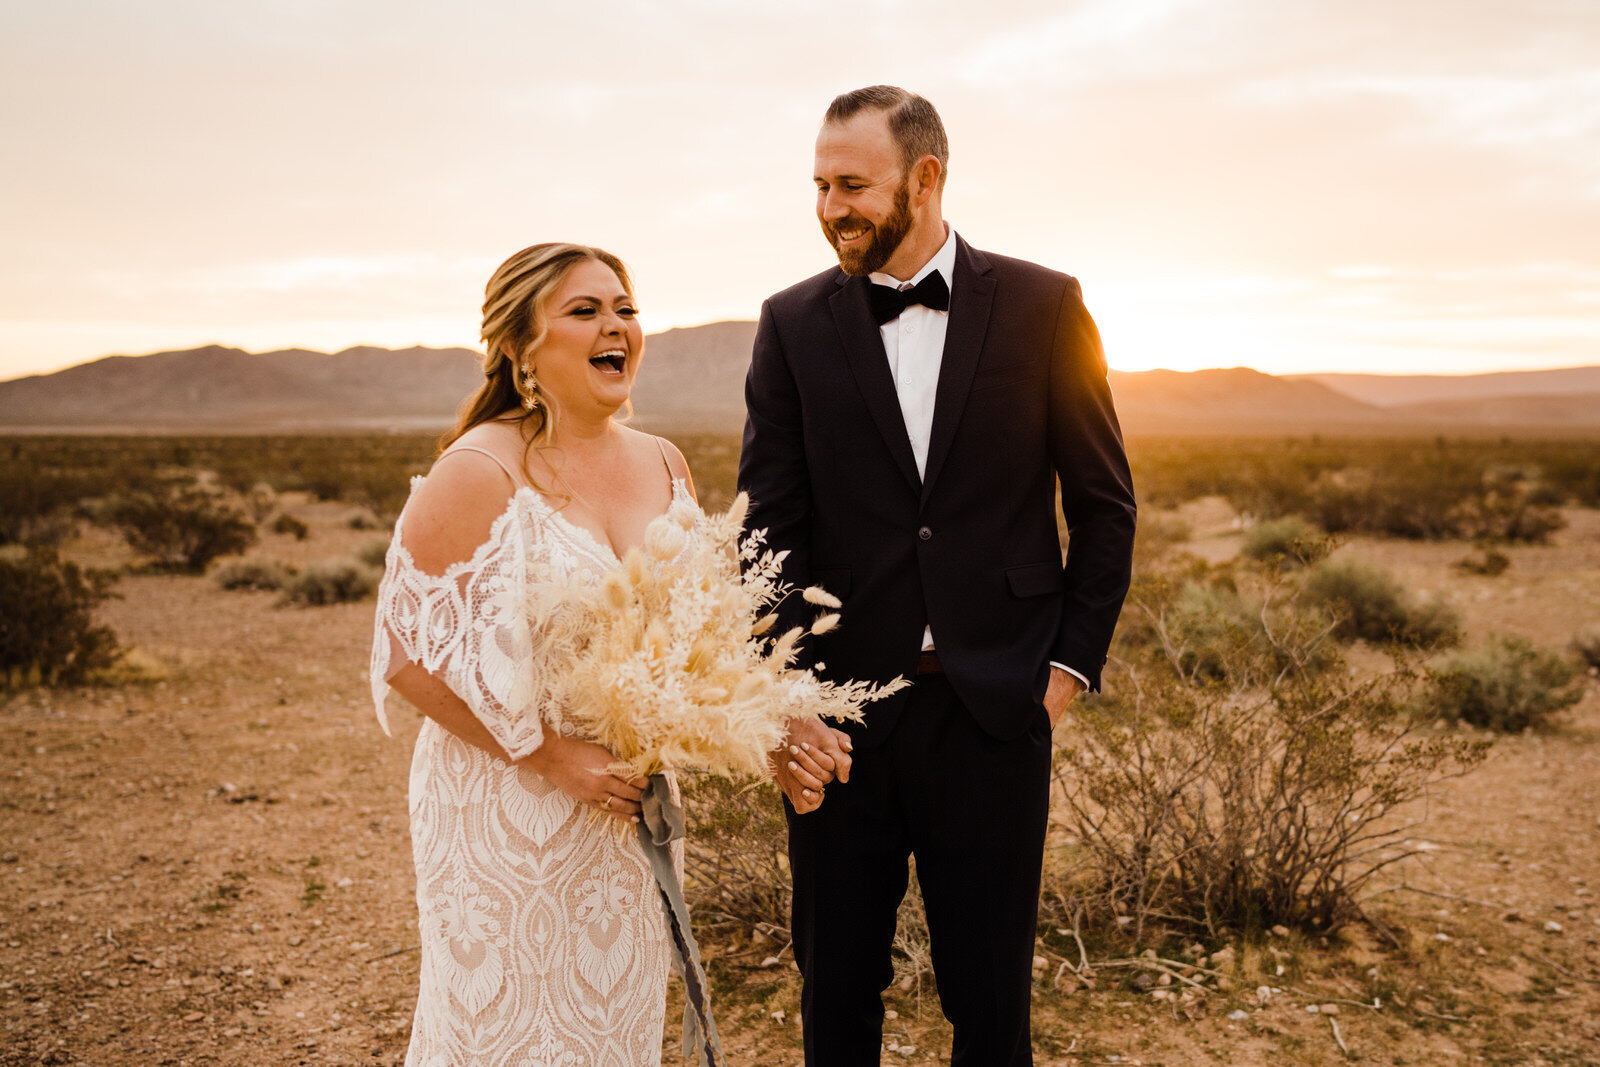 Las-Vegas-Wedding-Seven-Magic-Mountains-First-Look-Candid-Photo-of-Bride-Groom-Laughing.JPG